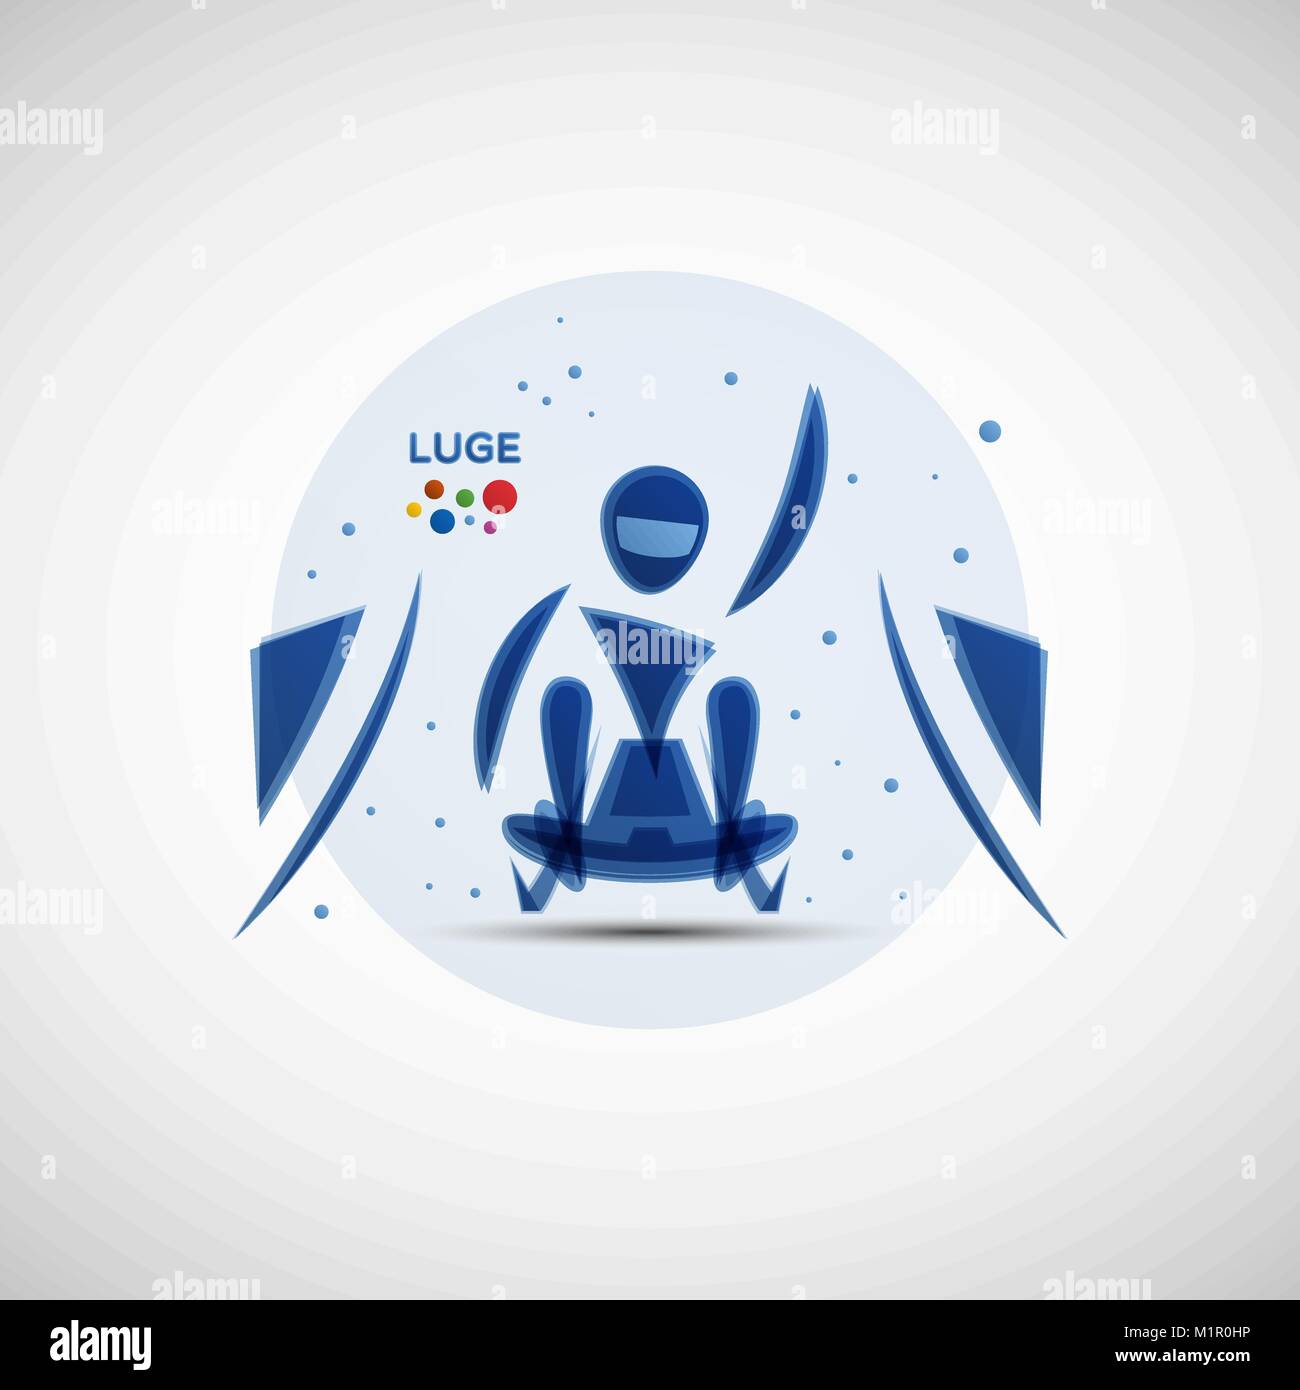 Luge championship banner. Winter sports icon. Abstract sportsman silhouette. Vector illustration of luge athlete sitting on the sled at finish Stock Vector